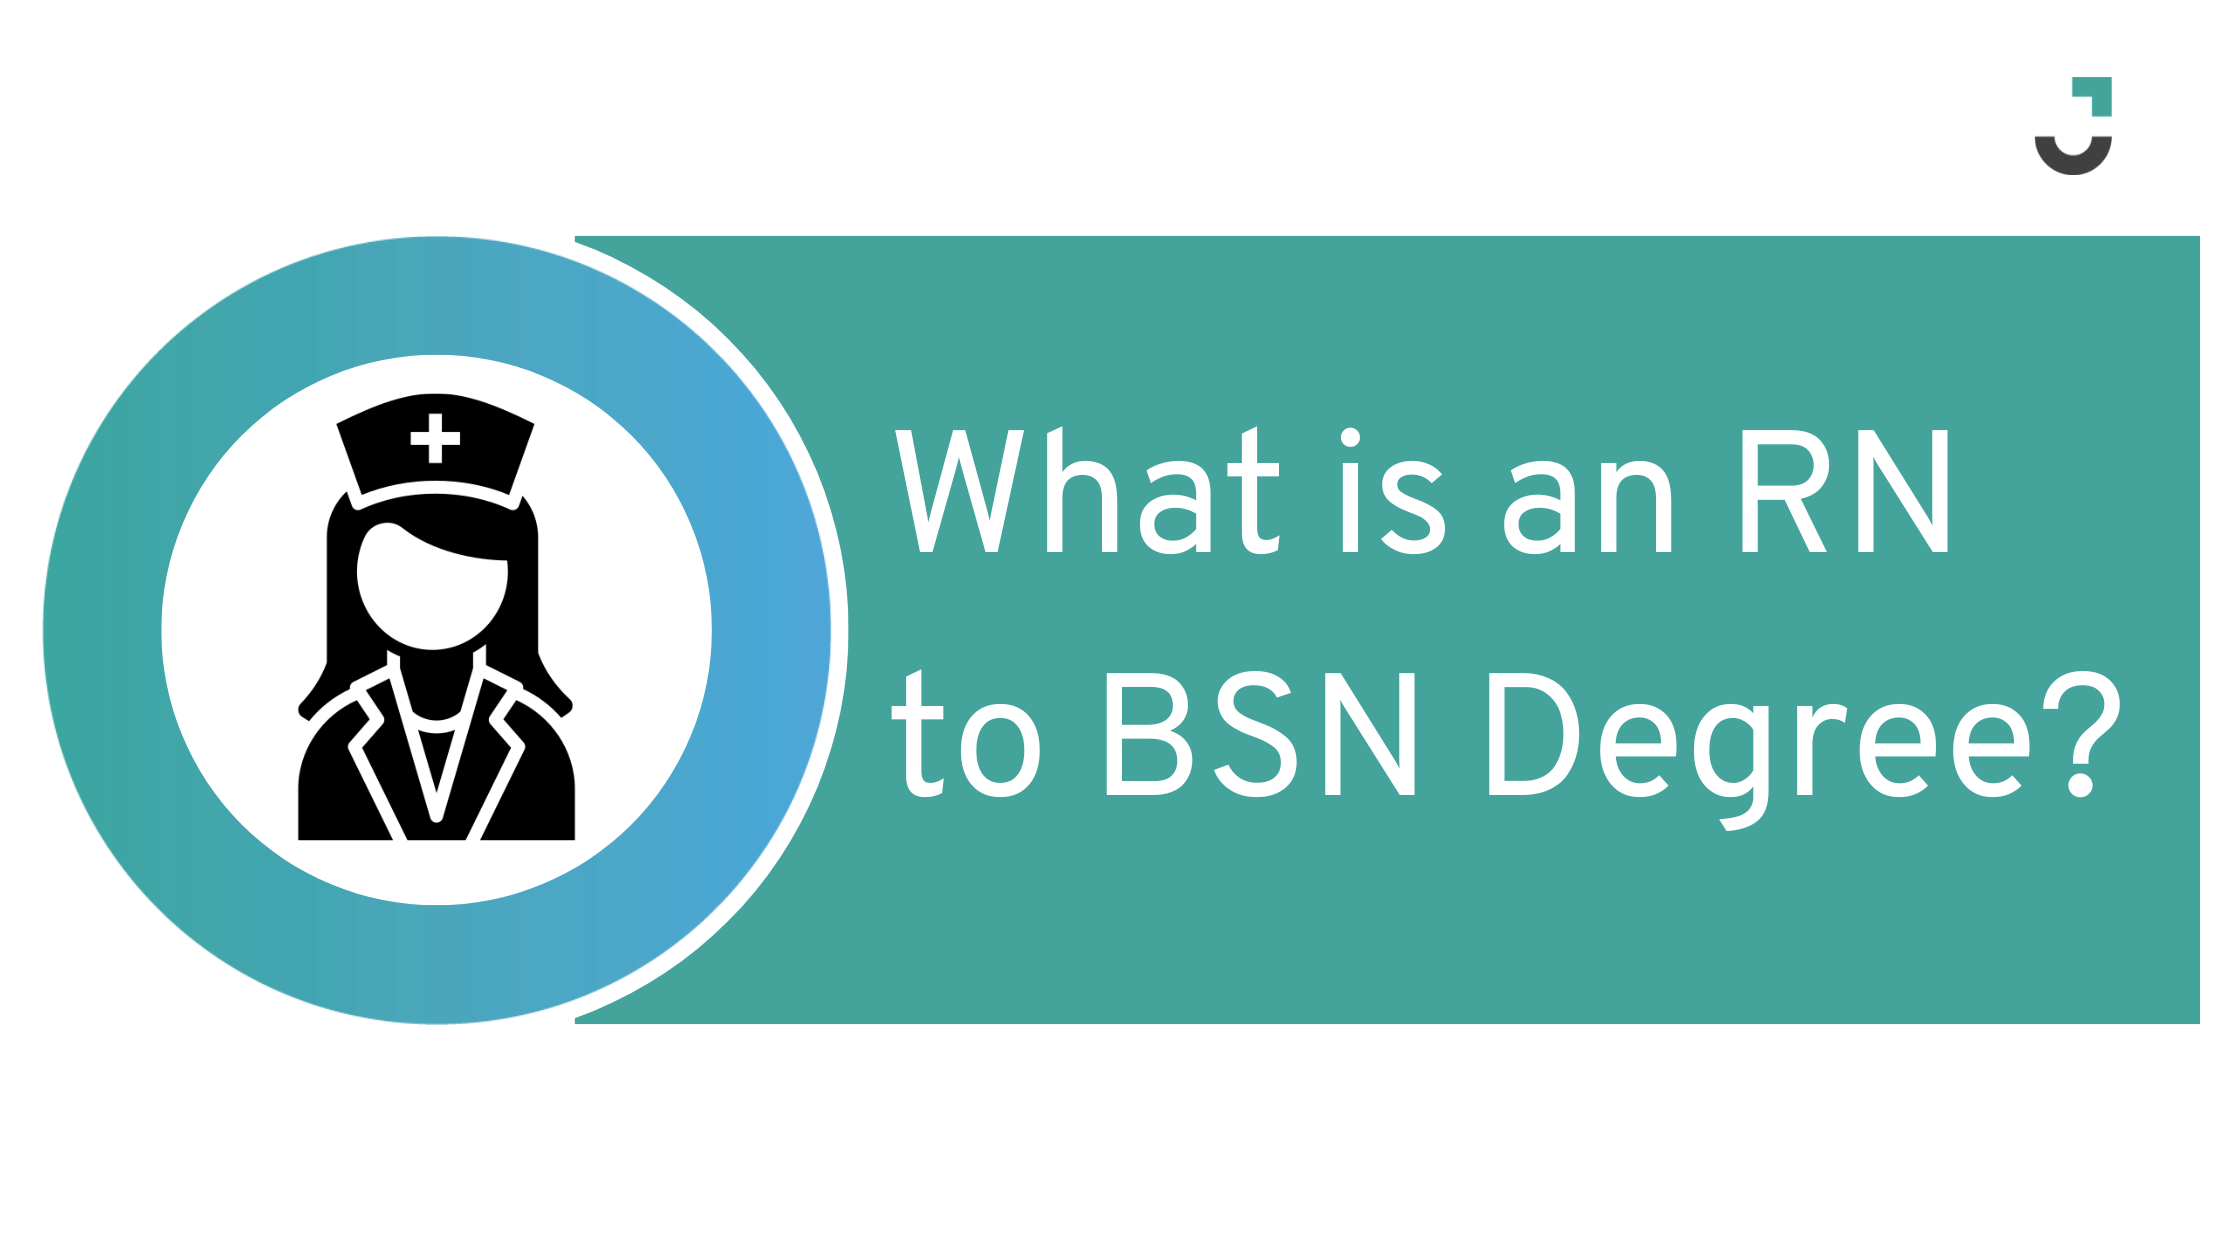 What is an RN to BSN Degree?